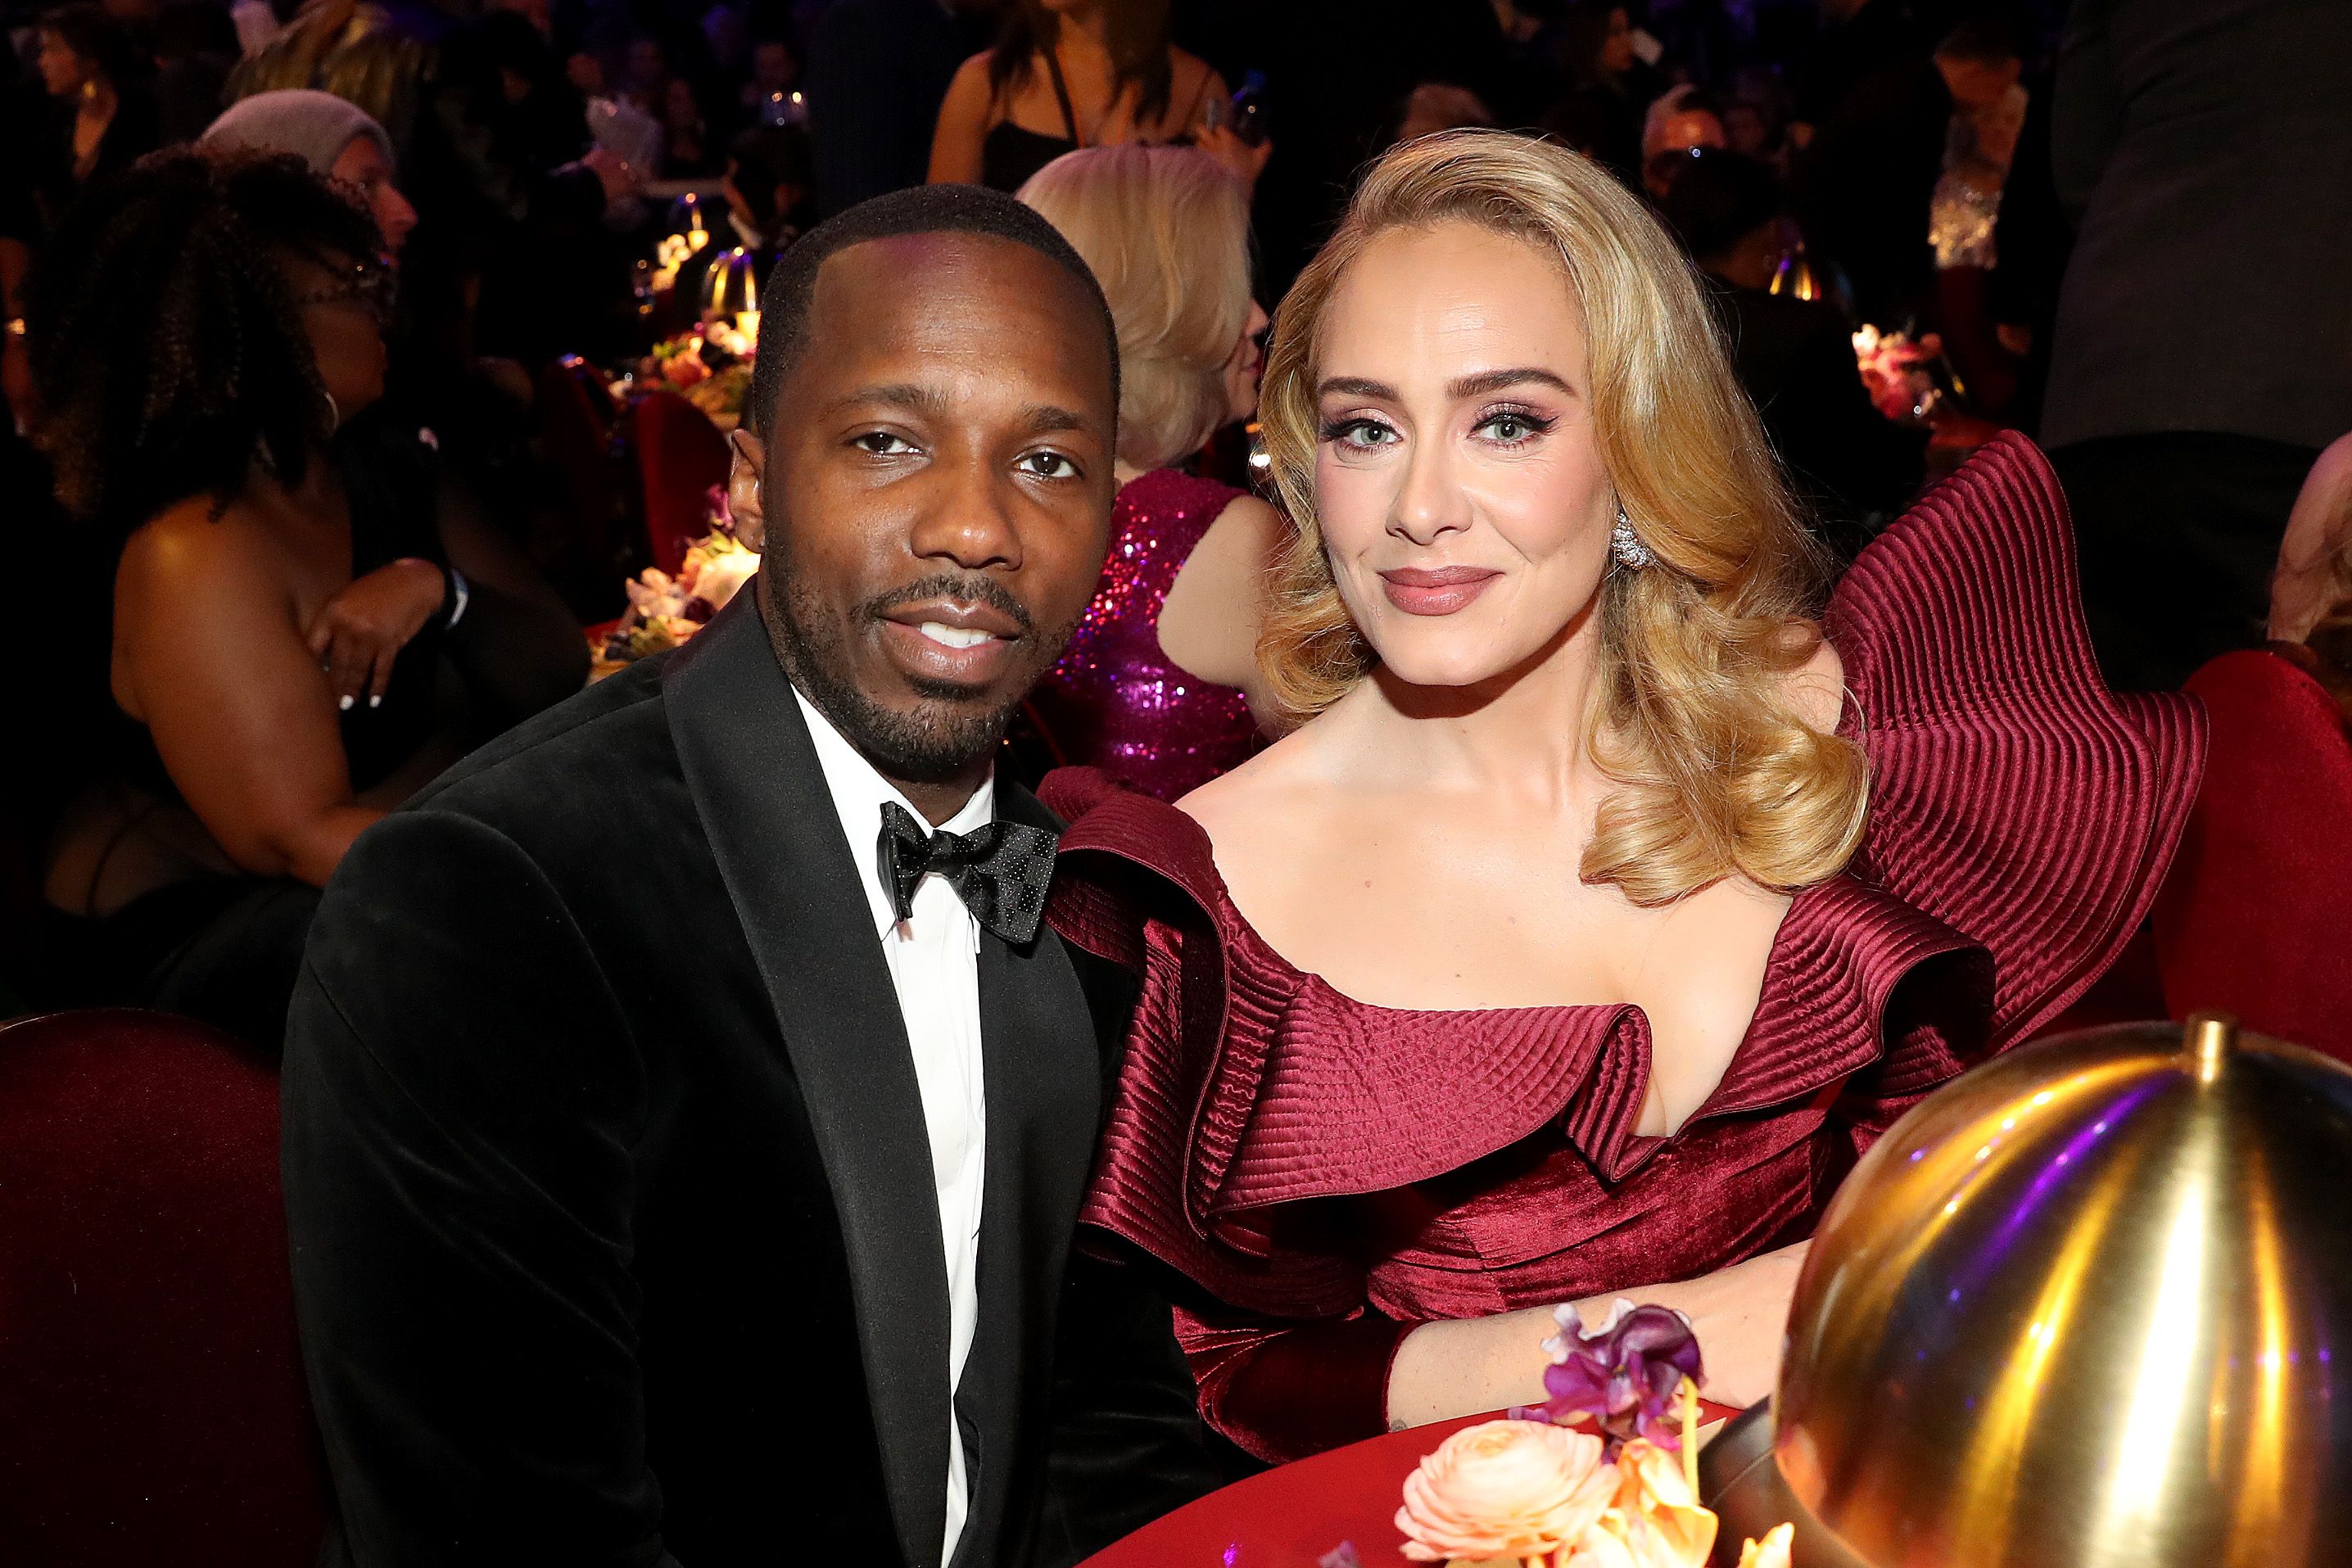 Adele engaged to Rich Paul, plans to marry this year - reports - NZ Herald